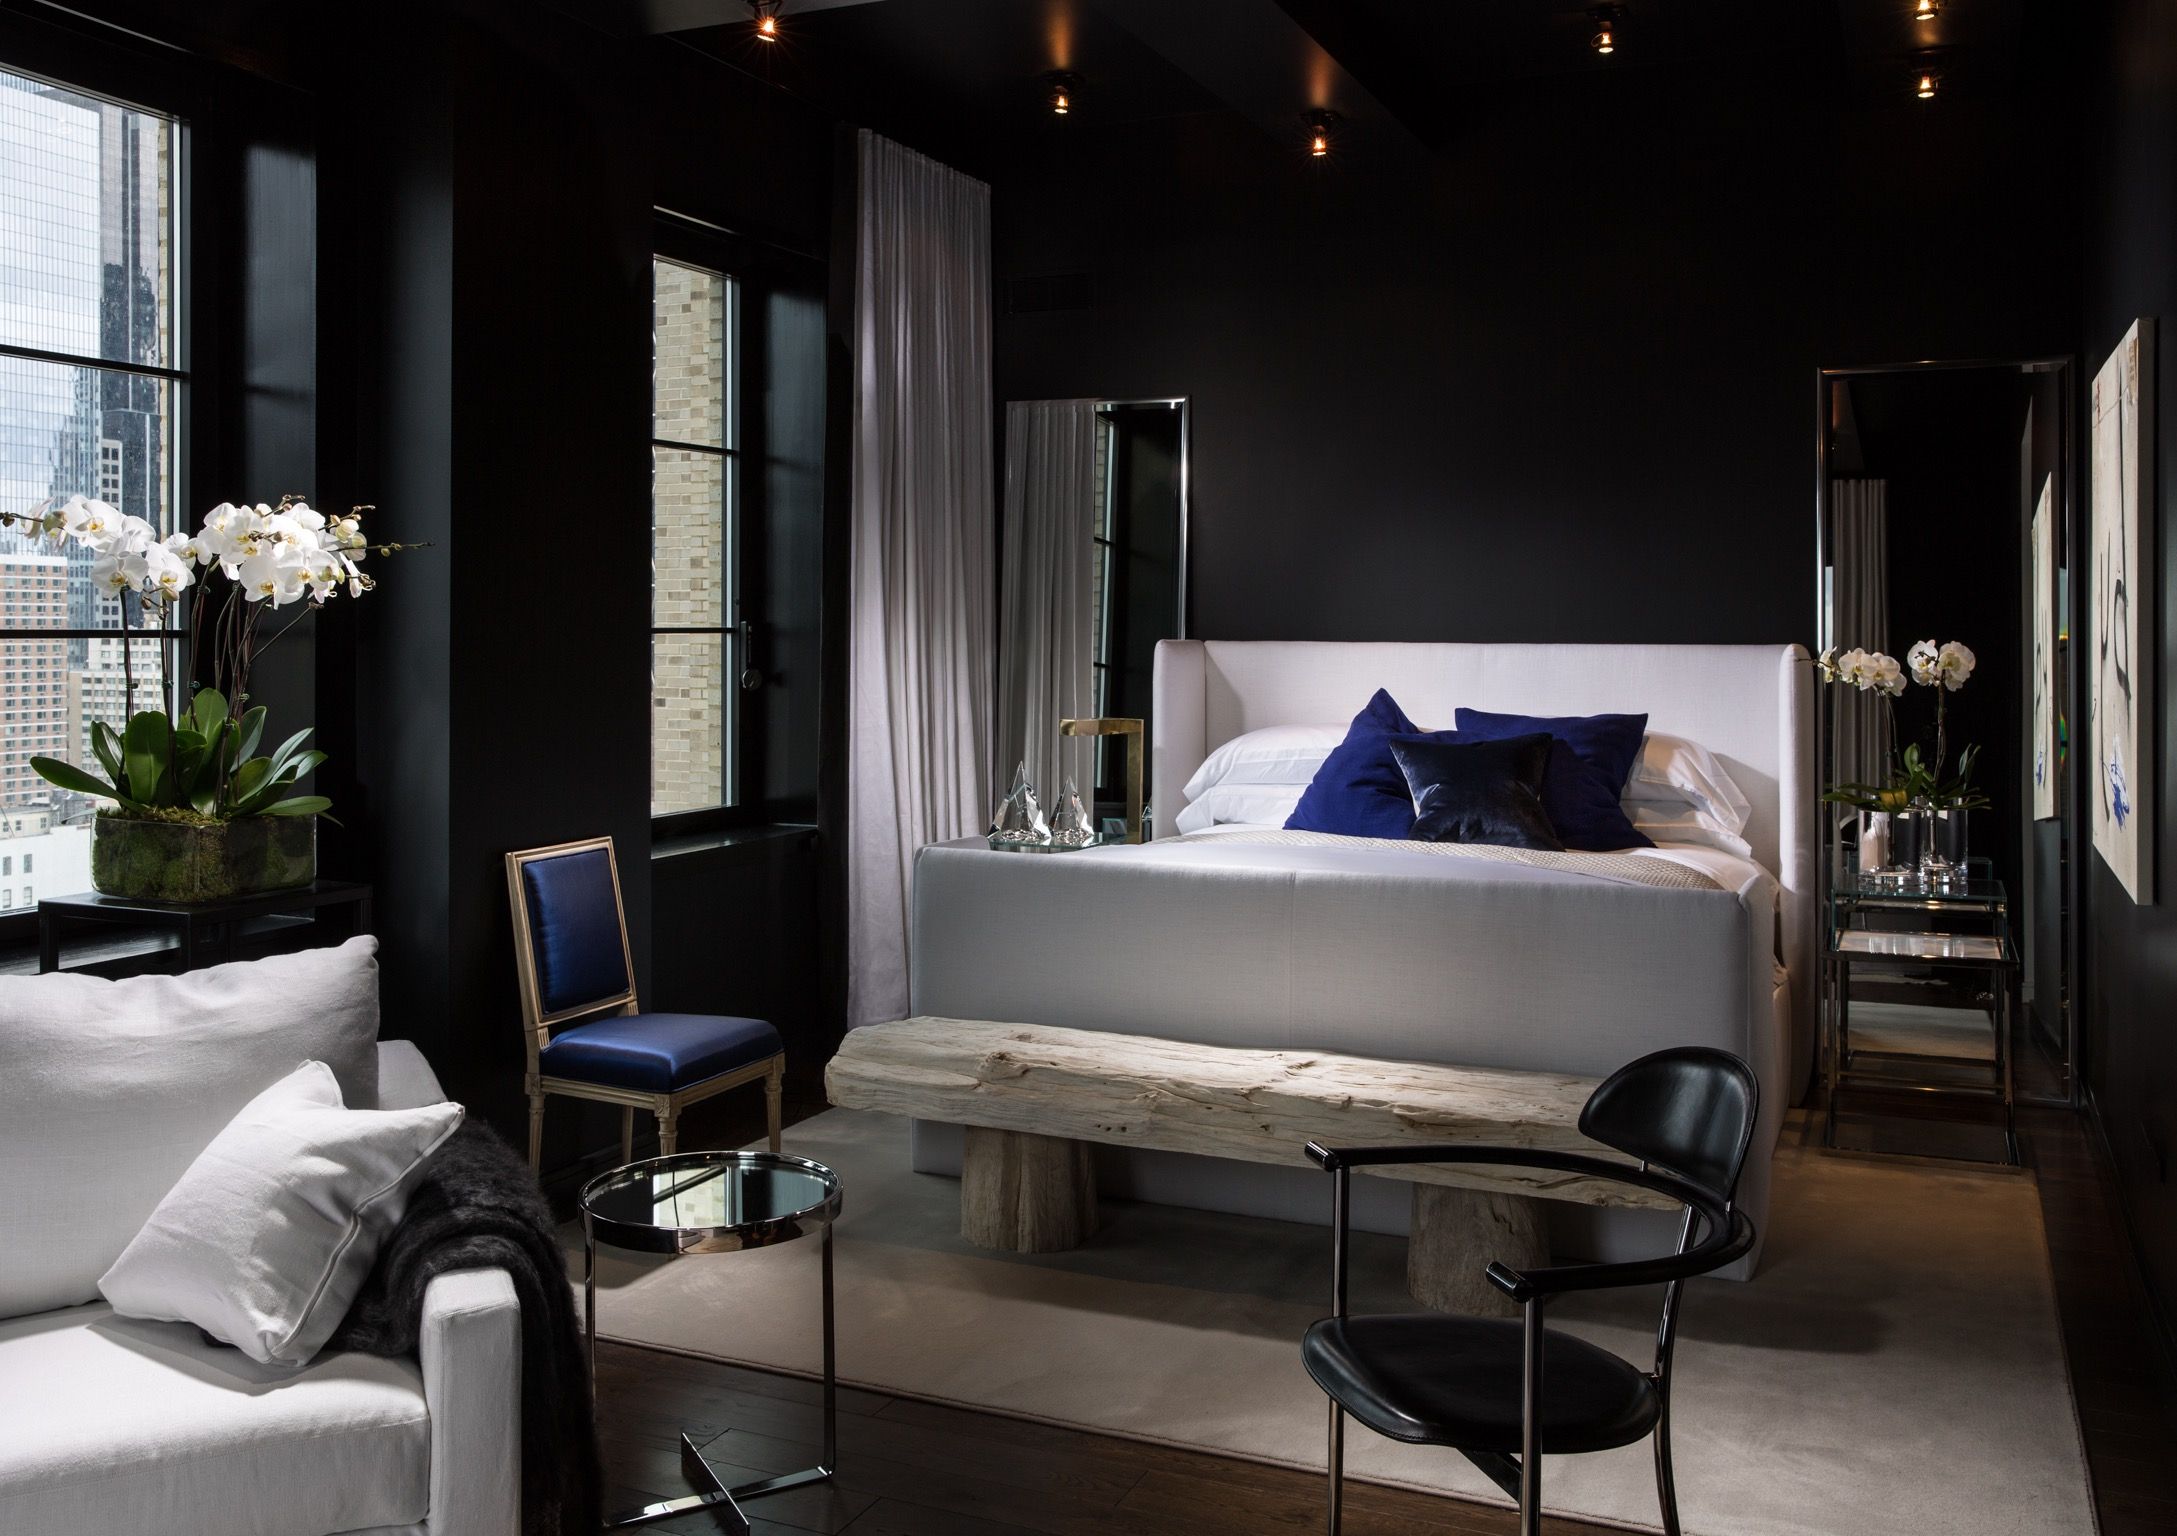 Black Transitional Apartment Bedroom In Gothic Nuance (View 5 of 11)